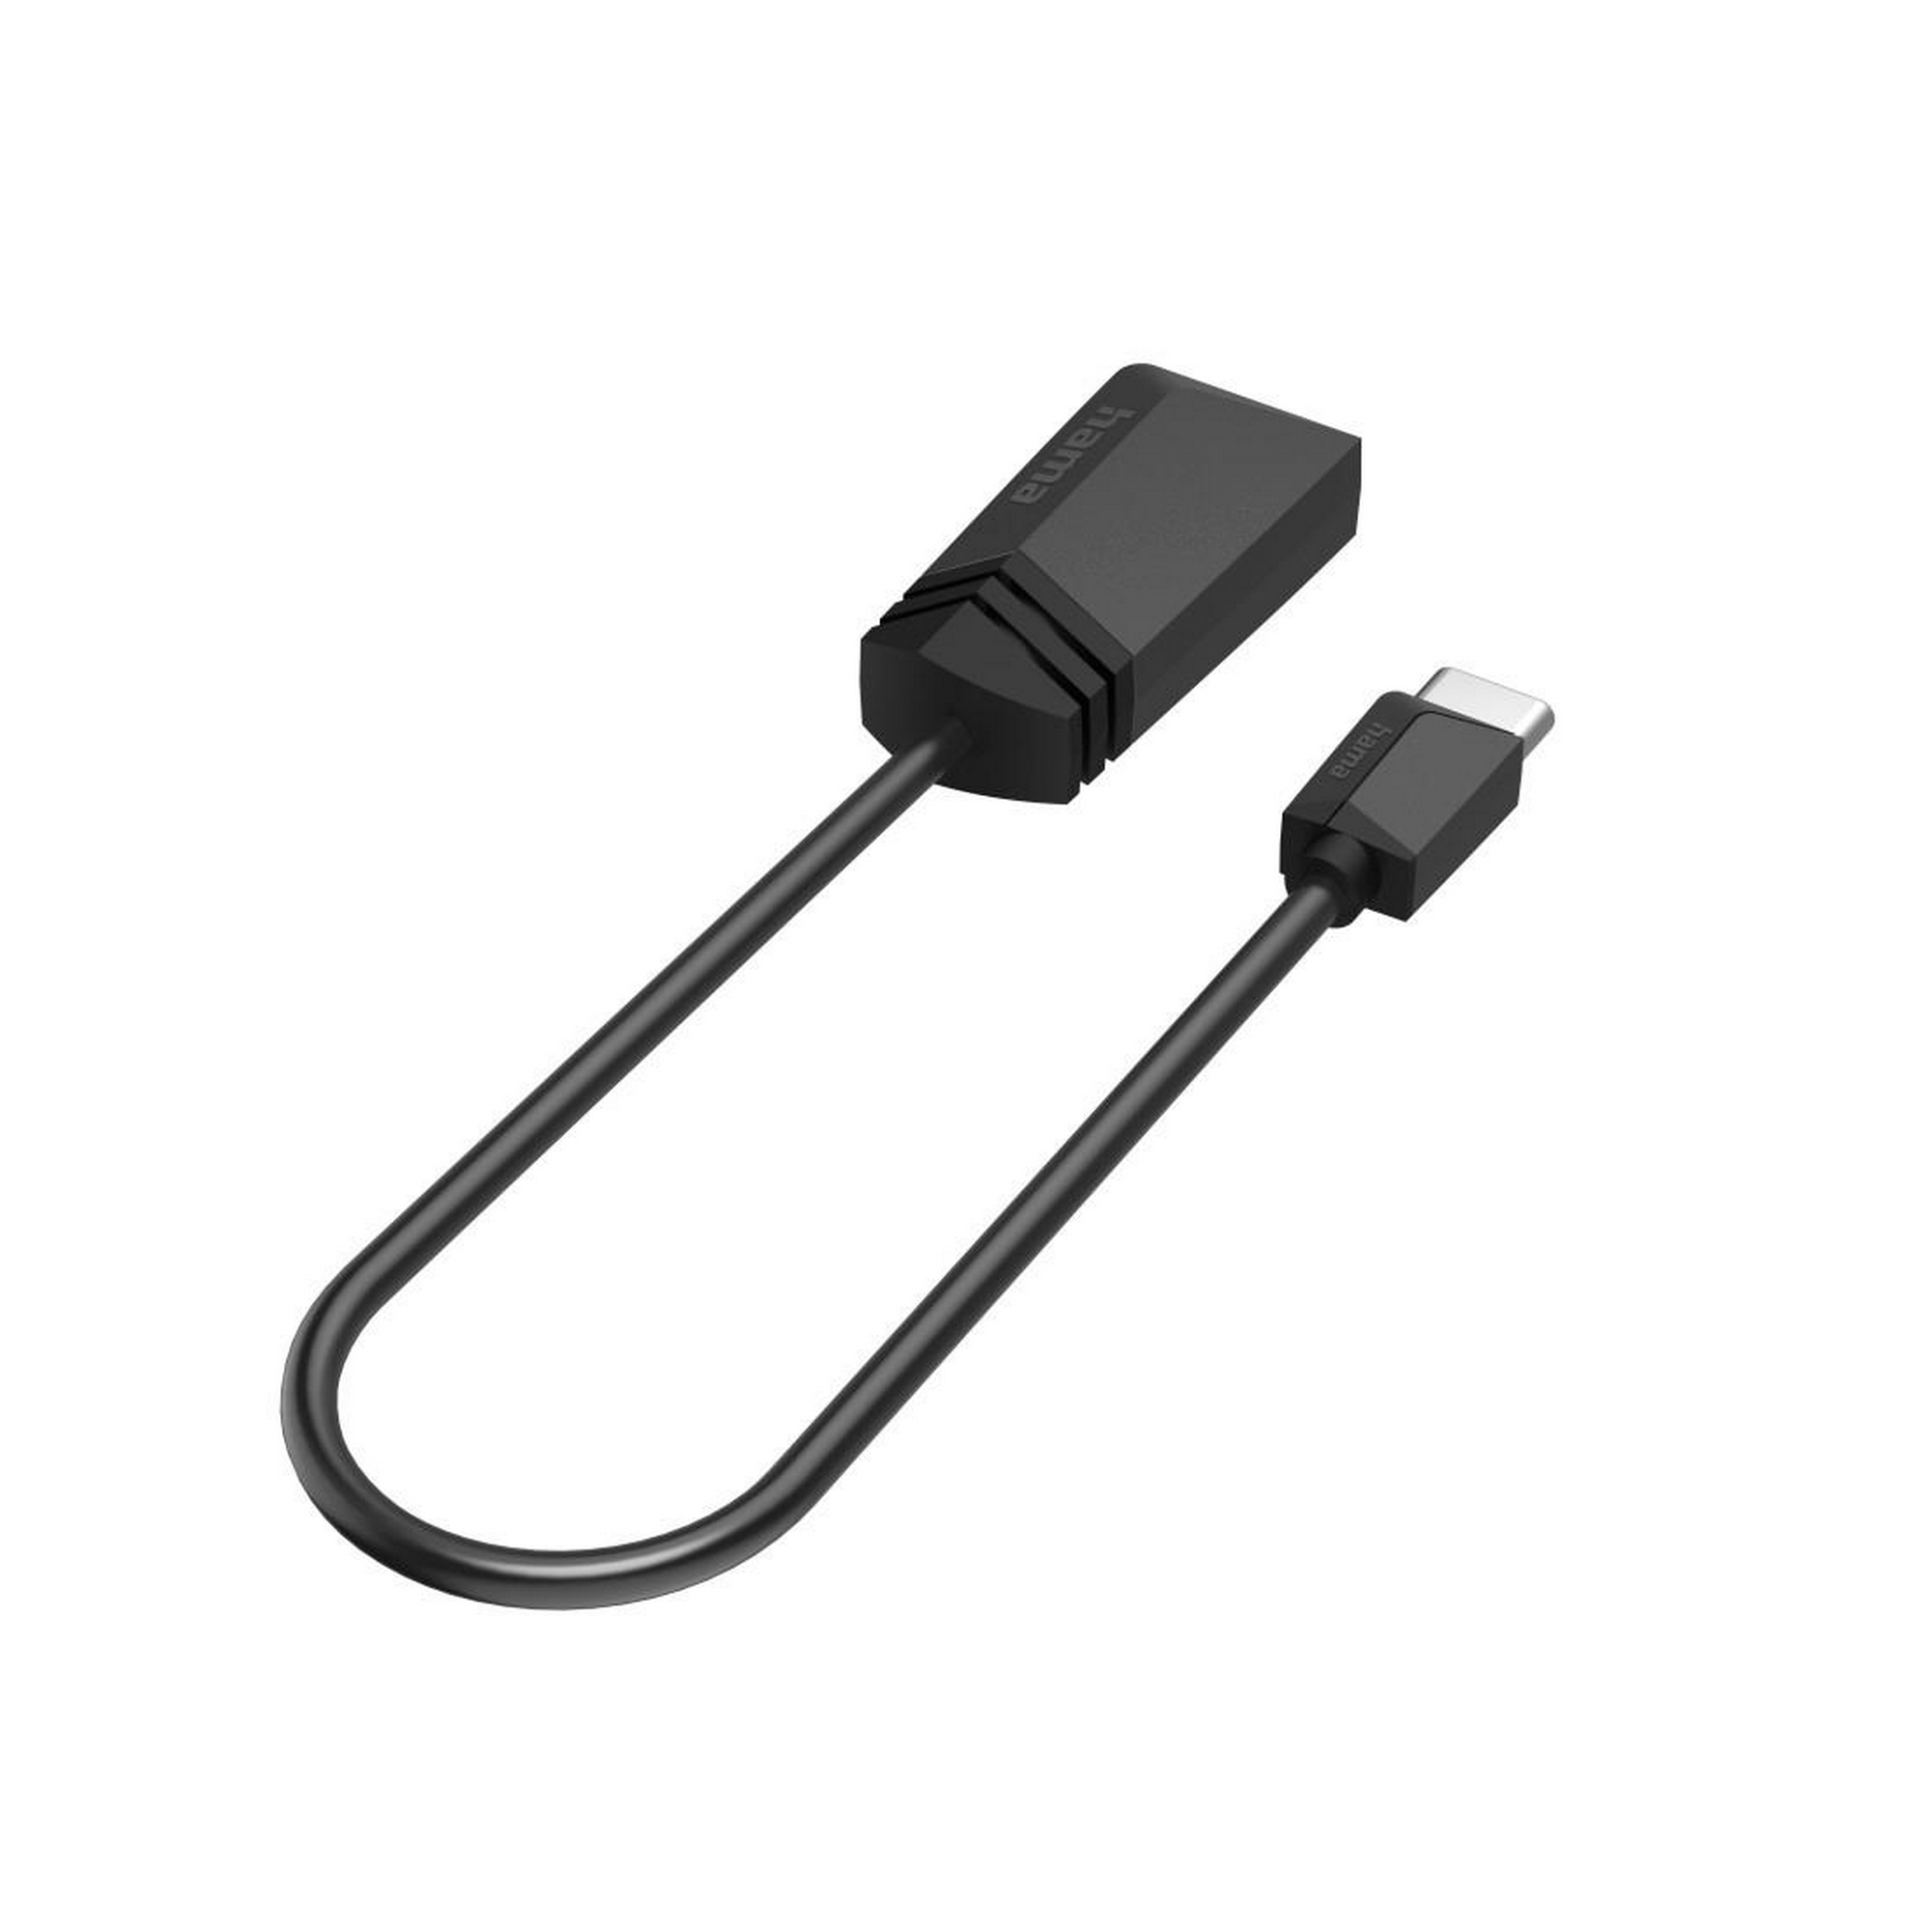 USB-OTG-Adapter USB-C-Stecker mit USB-A-Buchse + product picture